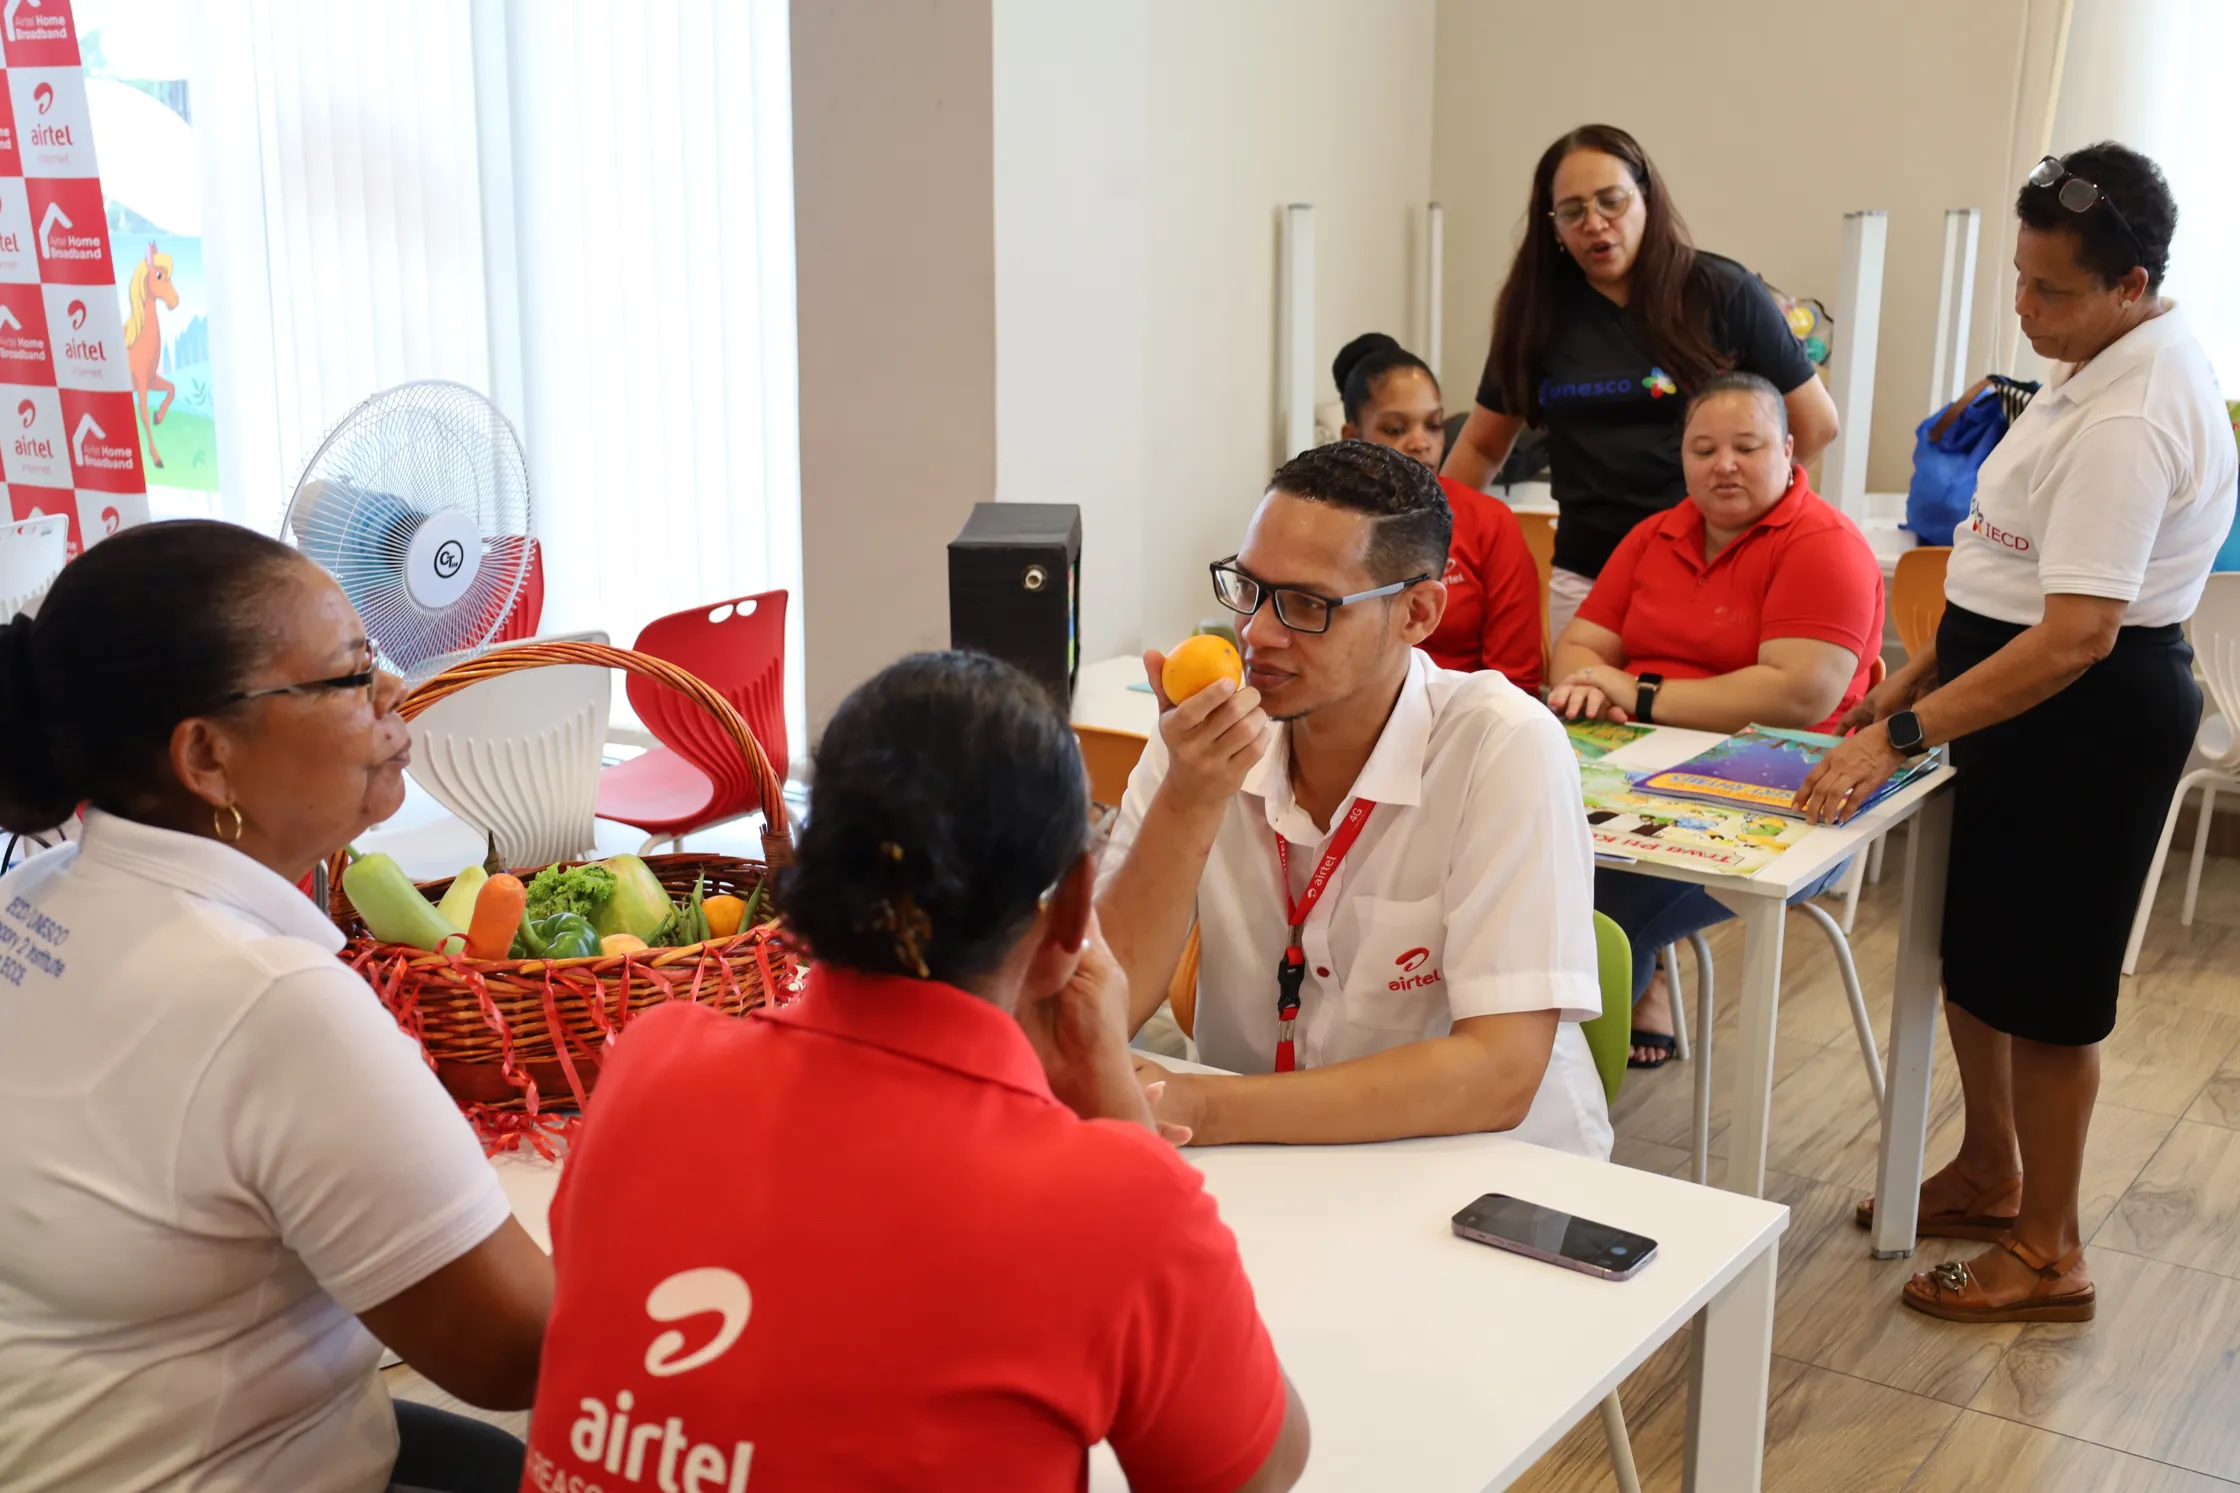 Empowering Working Parents: Airtel Seychelles Leads the Way with IECD’s SENSPA Program